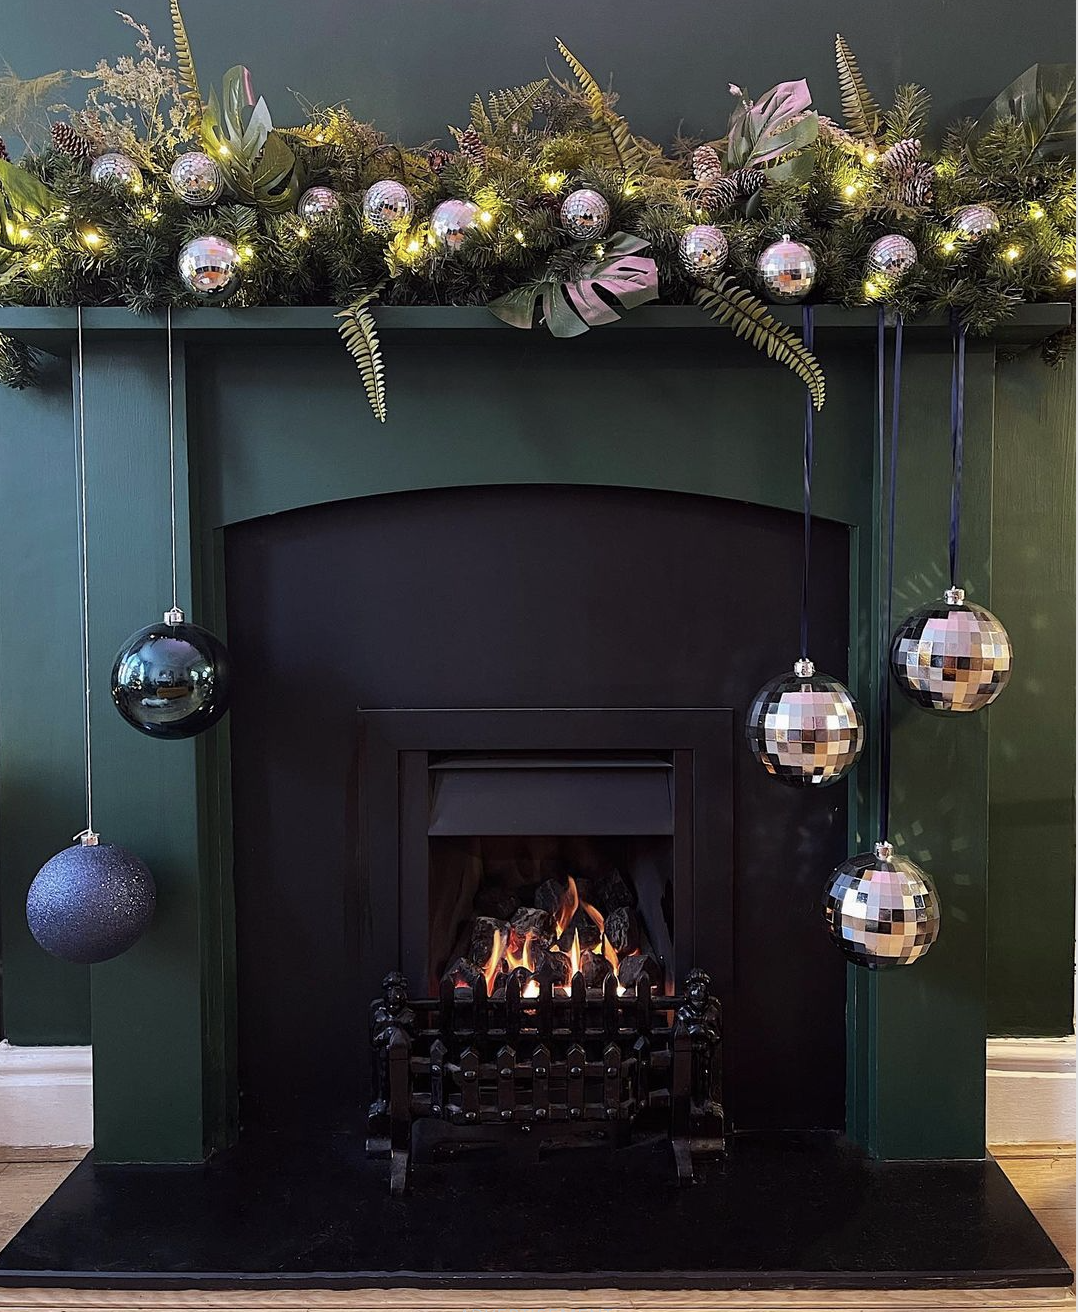 Use the Disco Balls Around the Fireplace